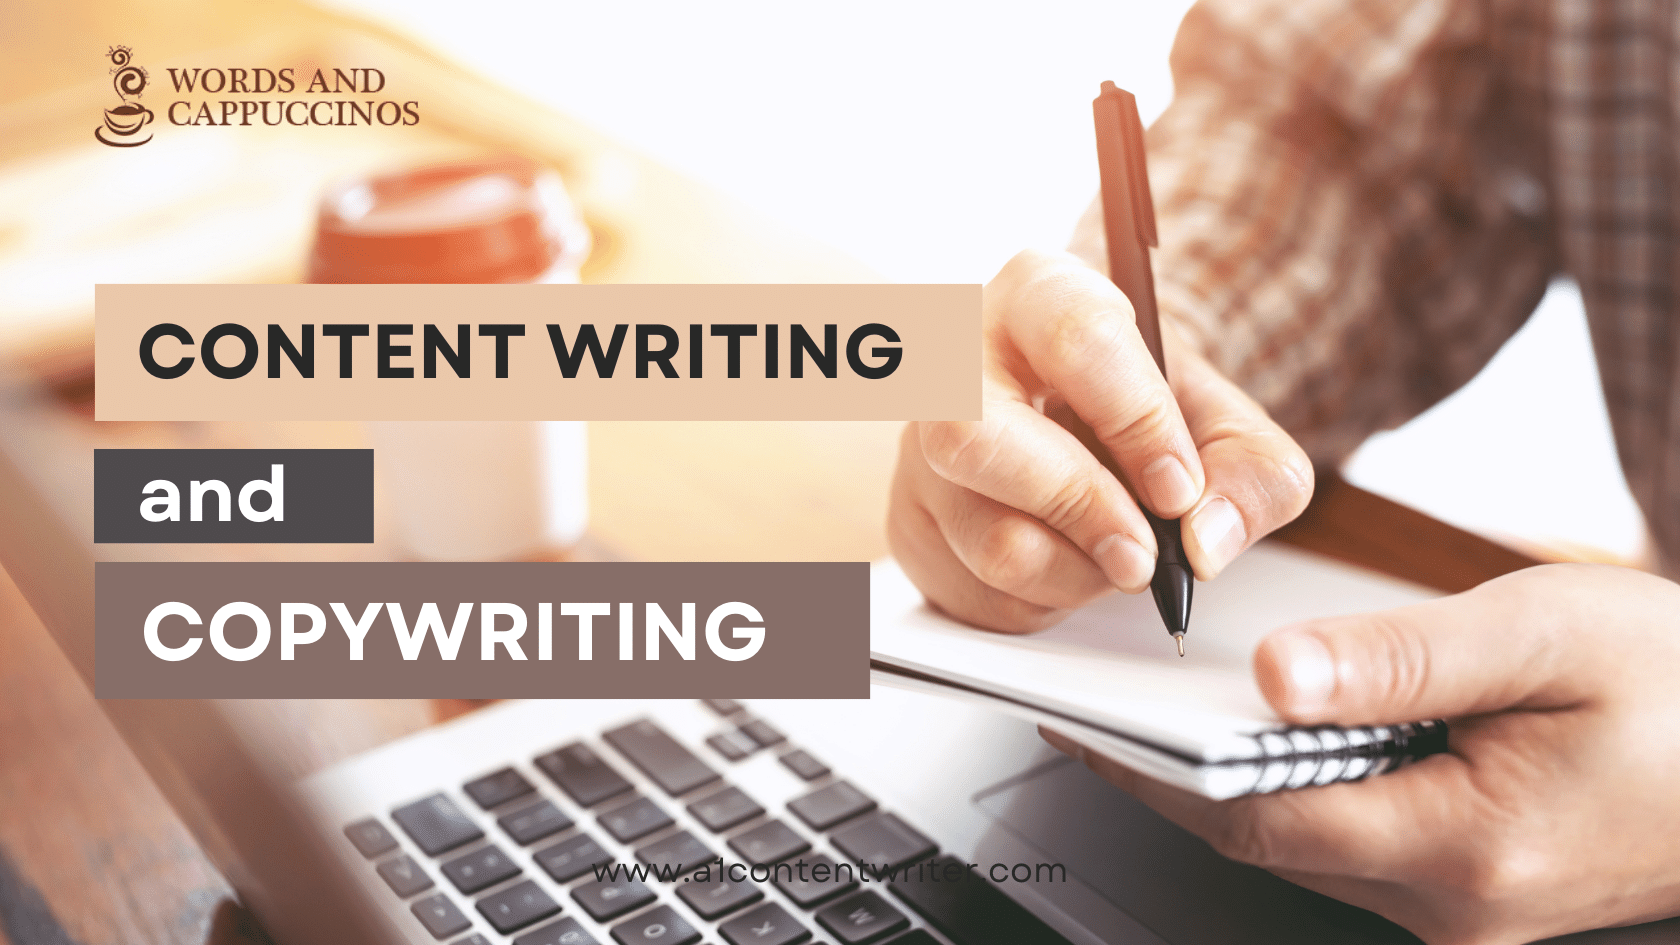 What Is The Difference Between Content Writing And Copywriting?